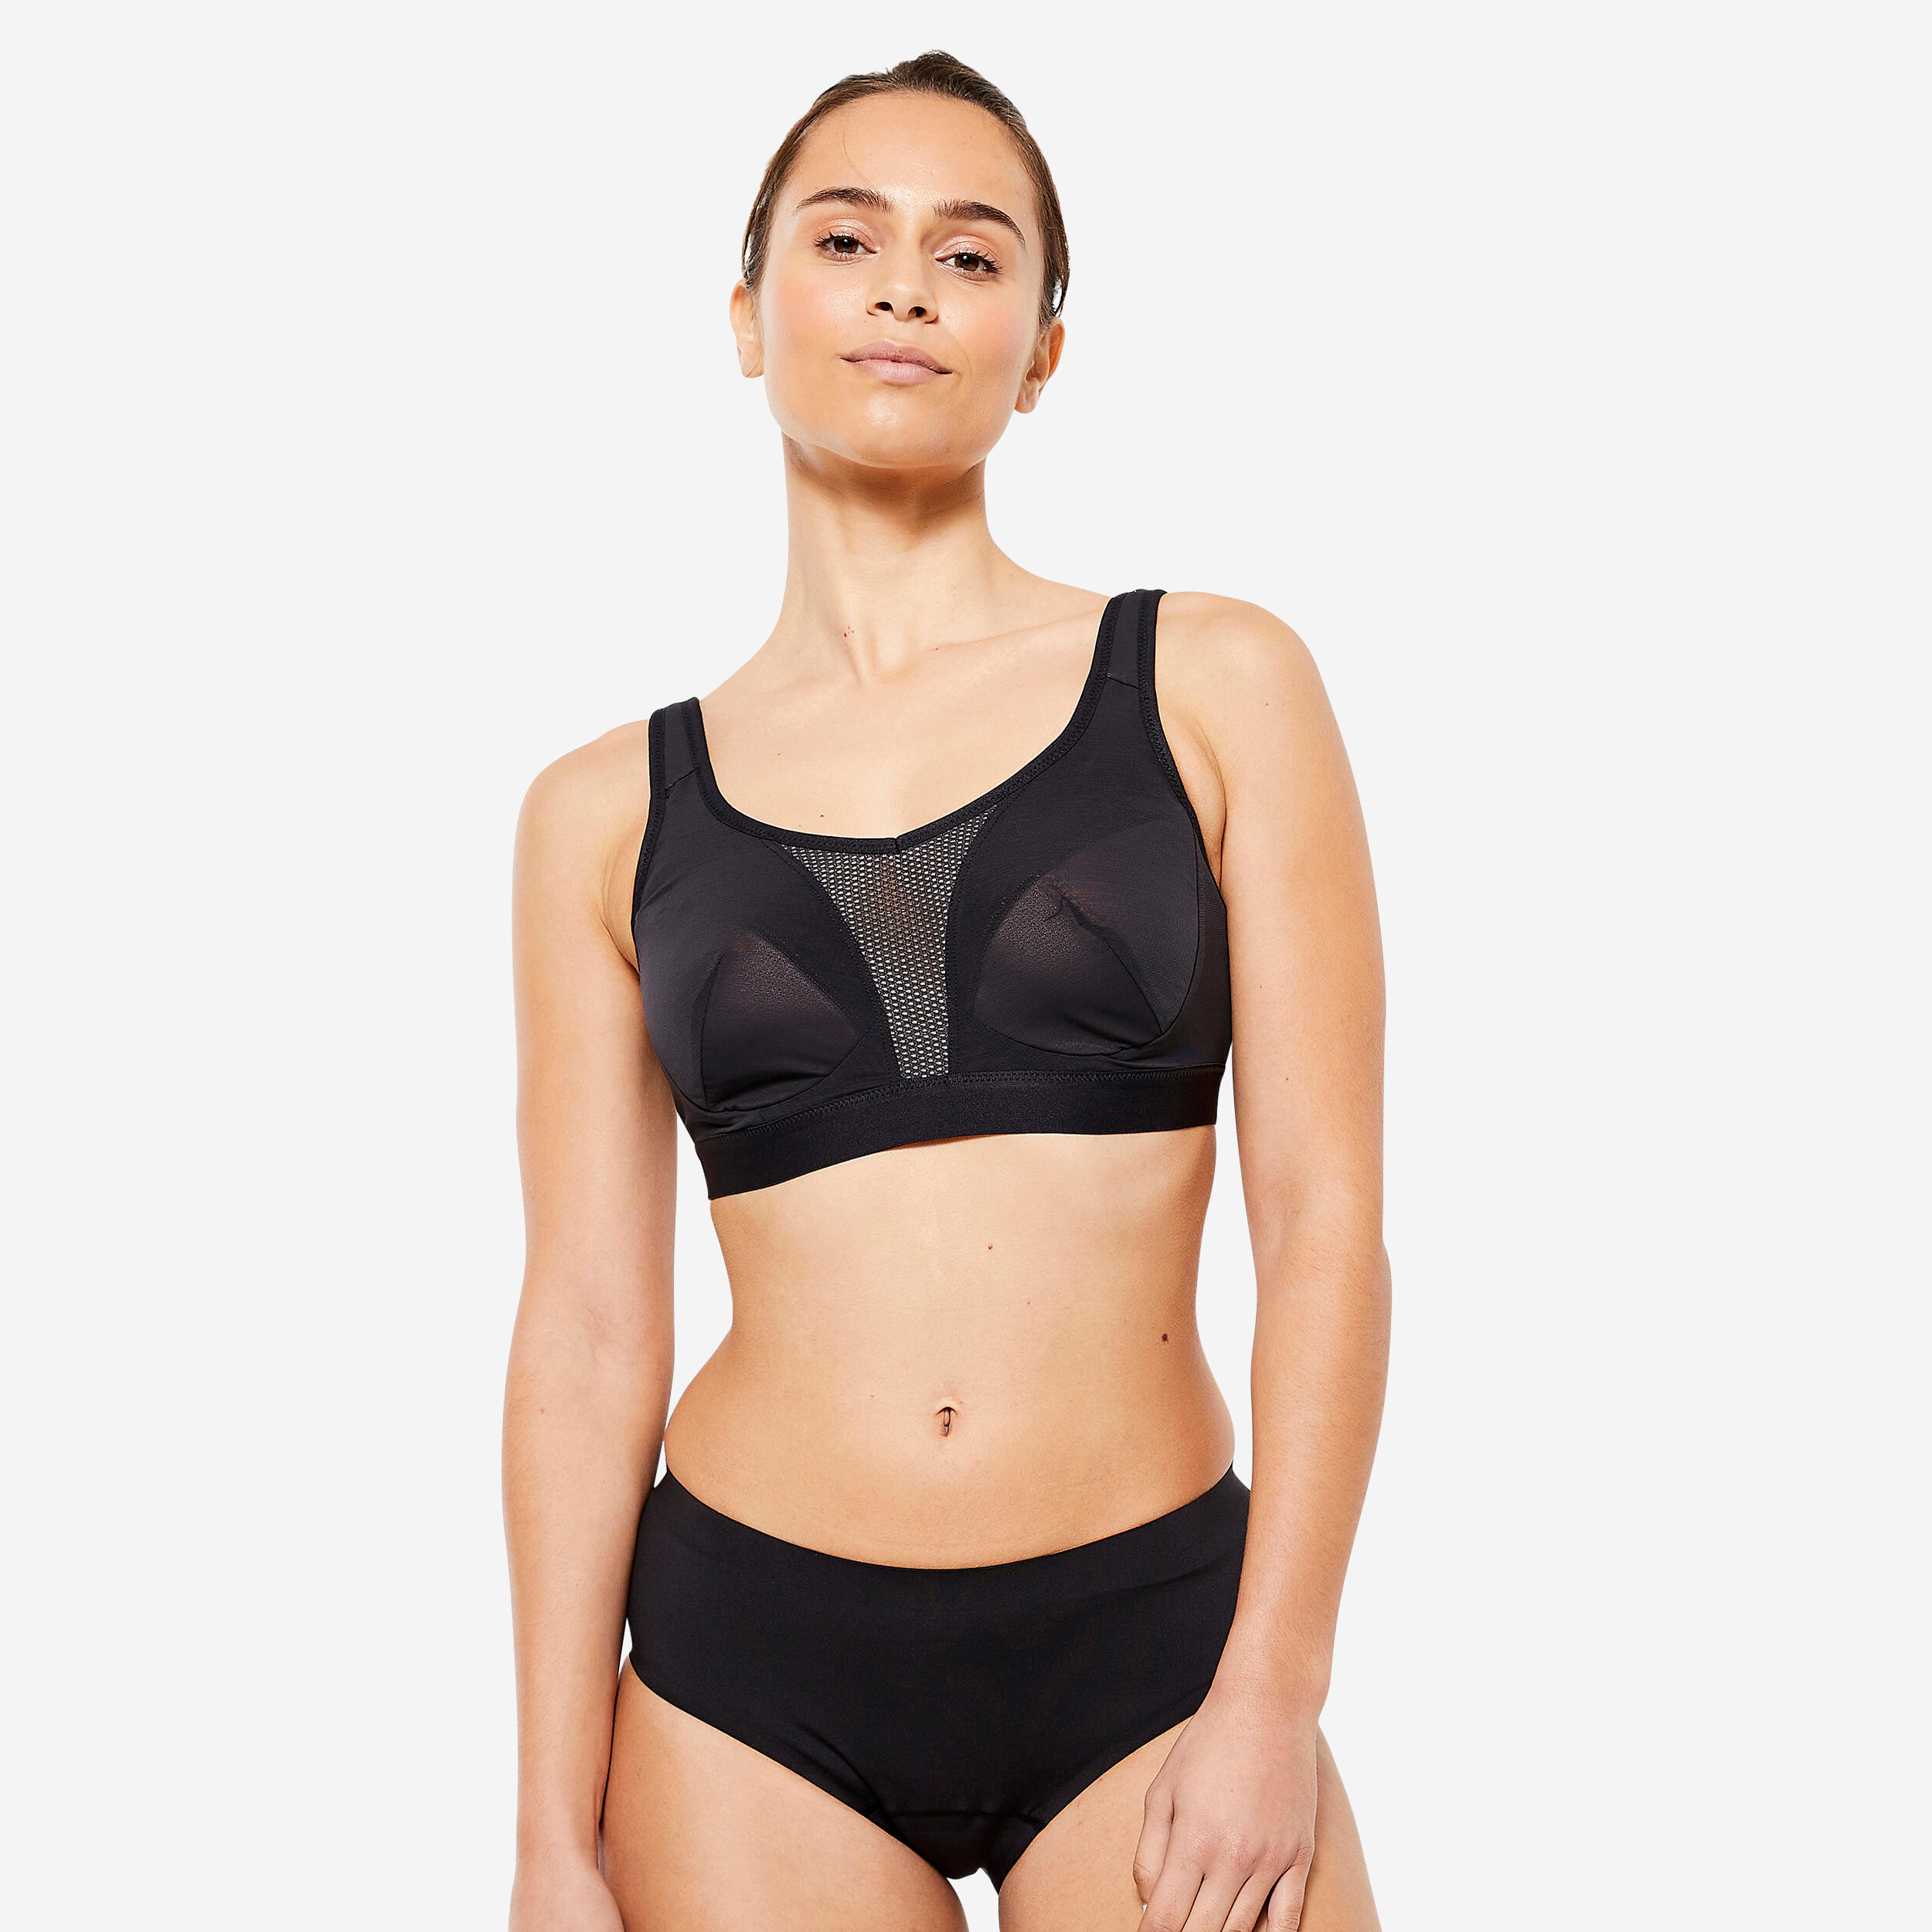 Women’s High Support Bra with Crossed Straps - Black